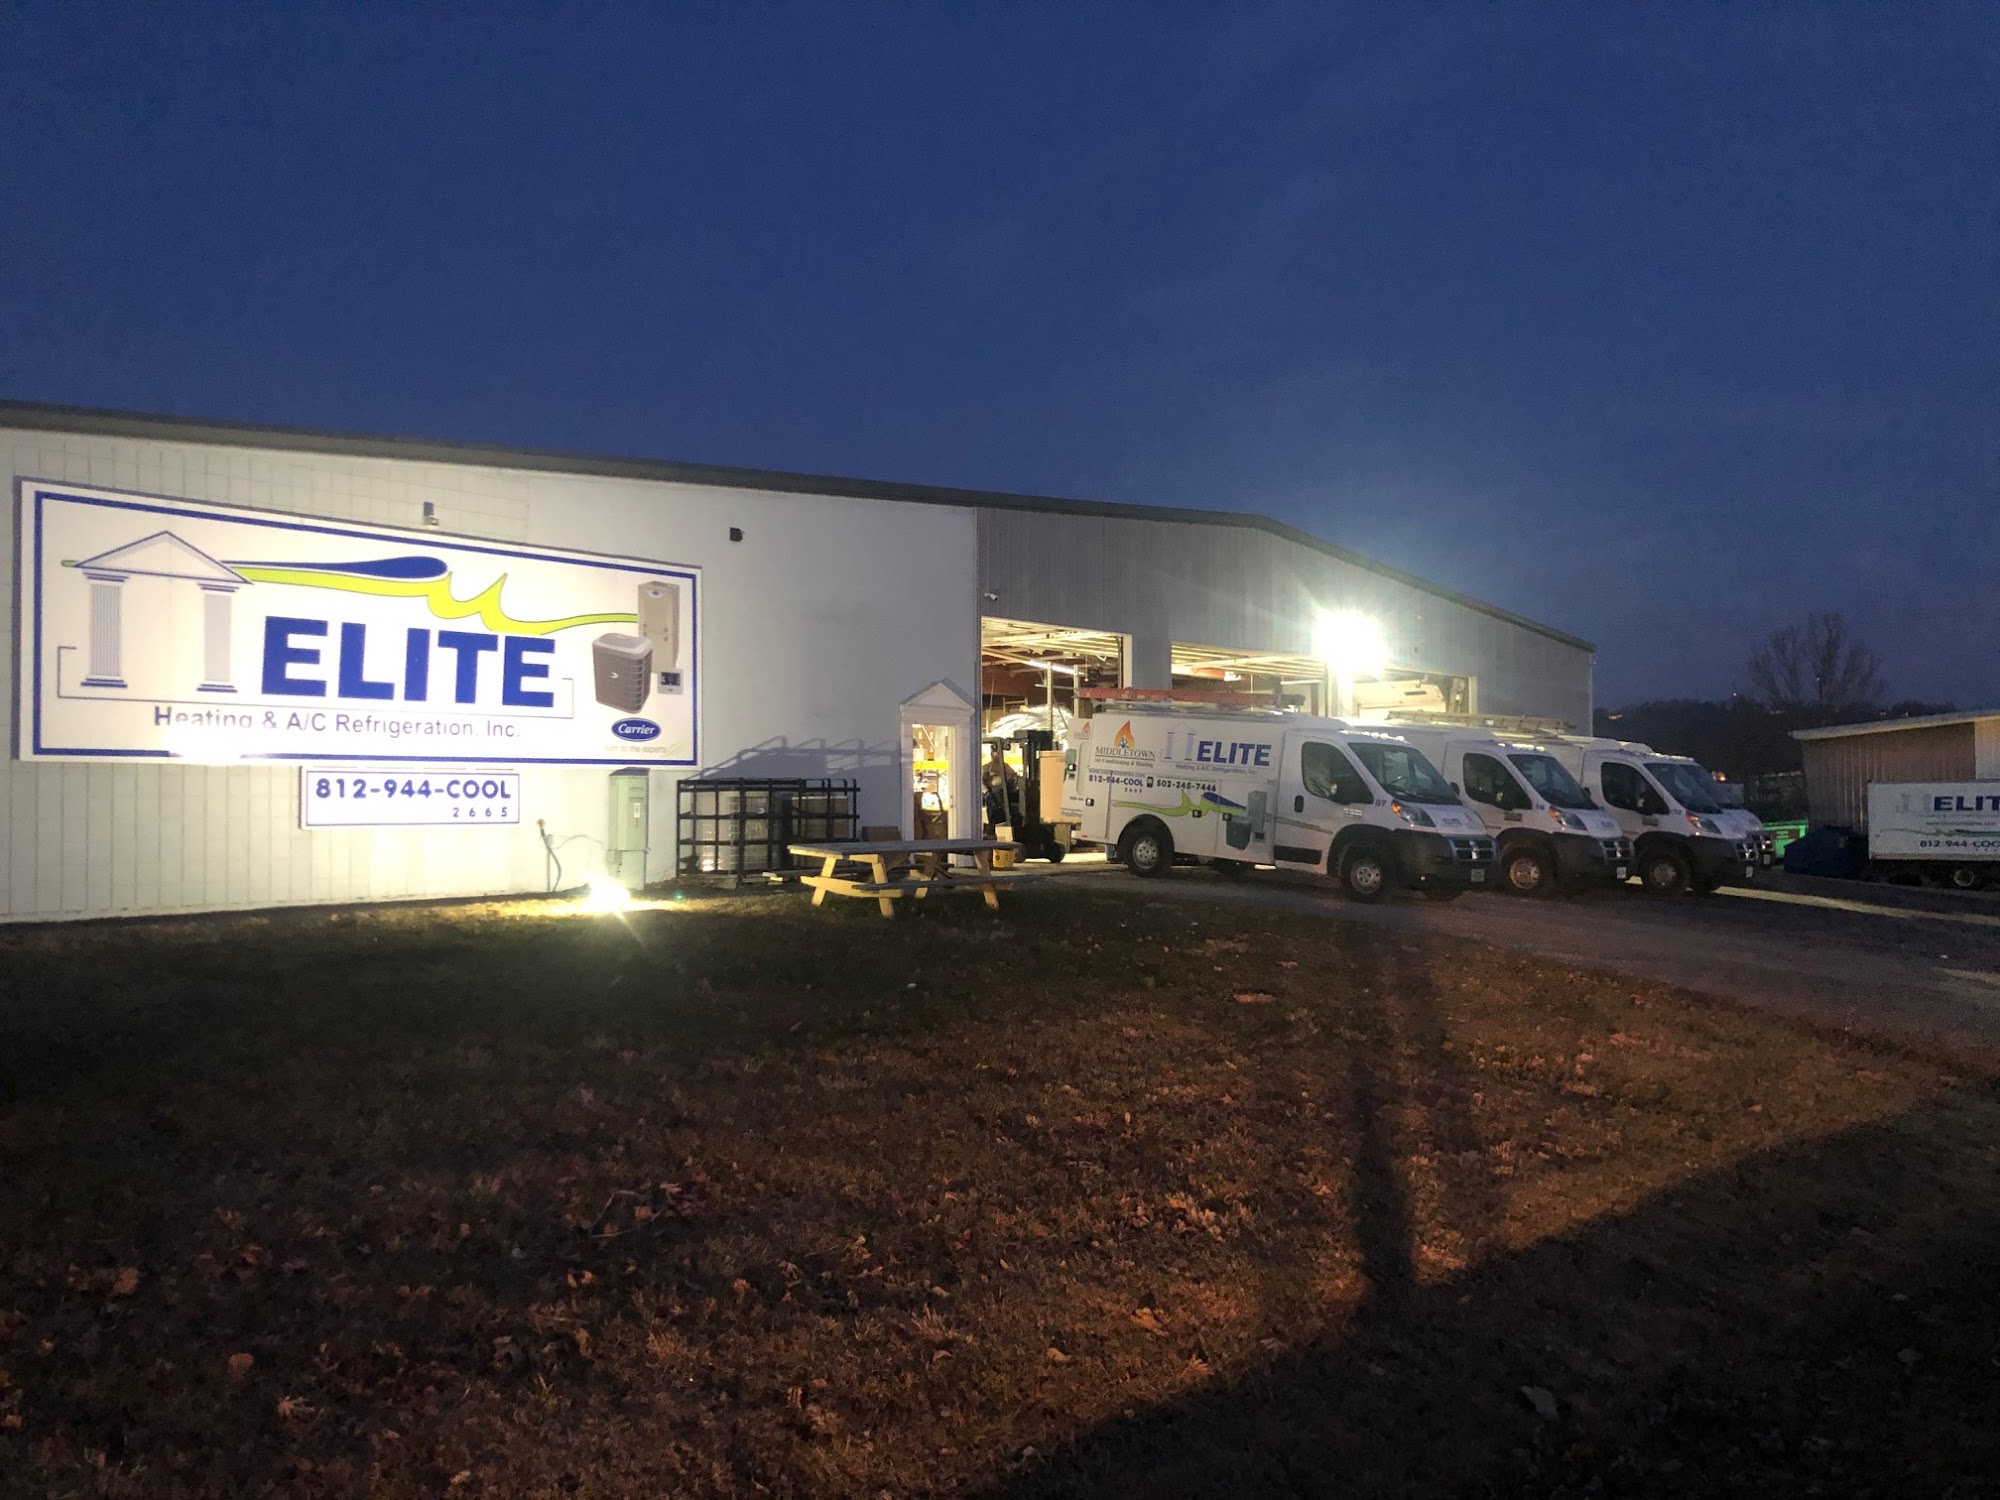 Elite Heating and Air Conditioning